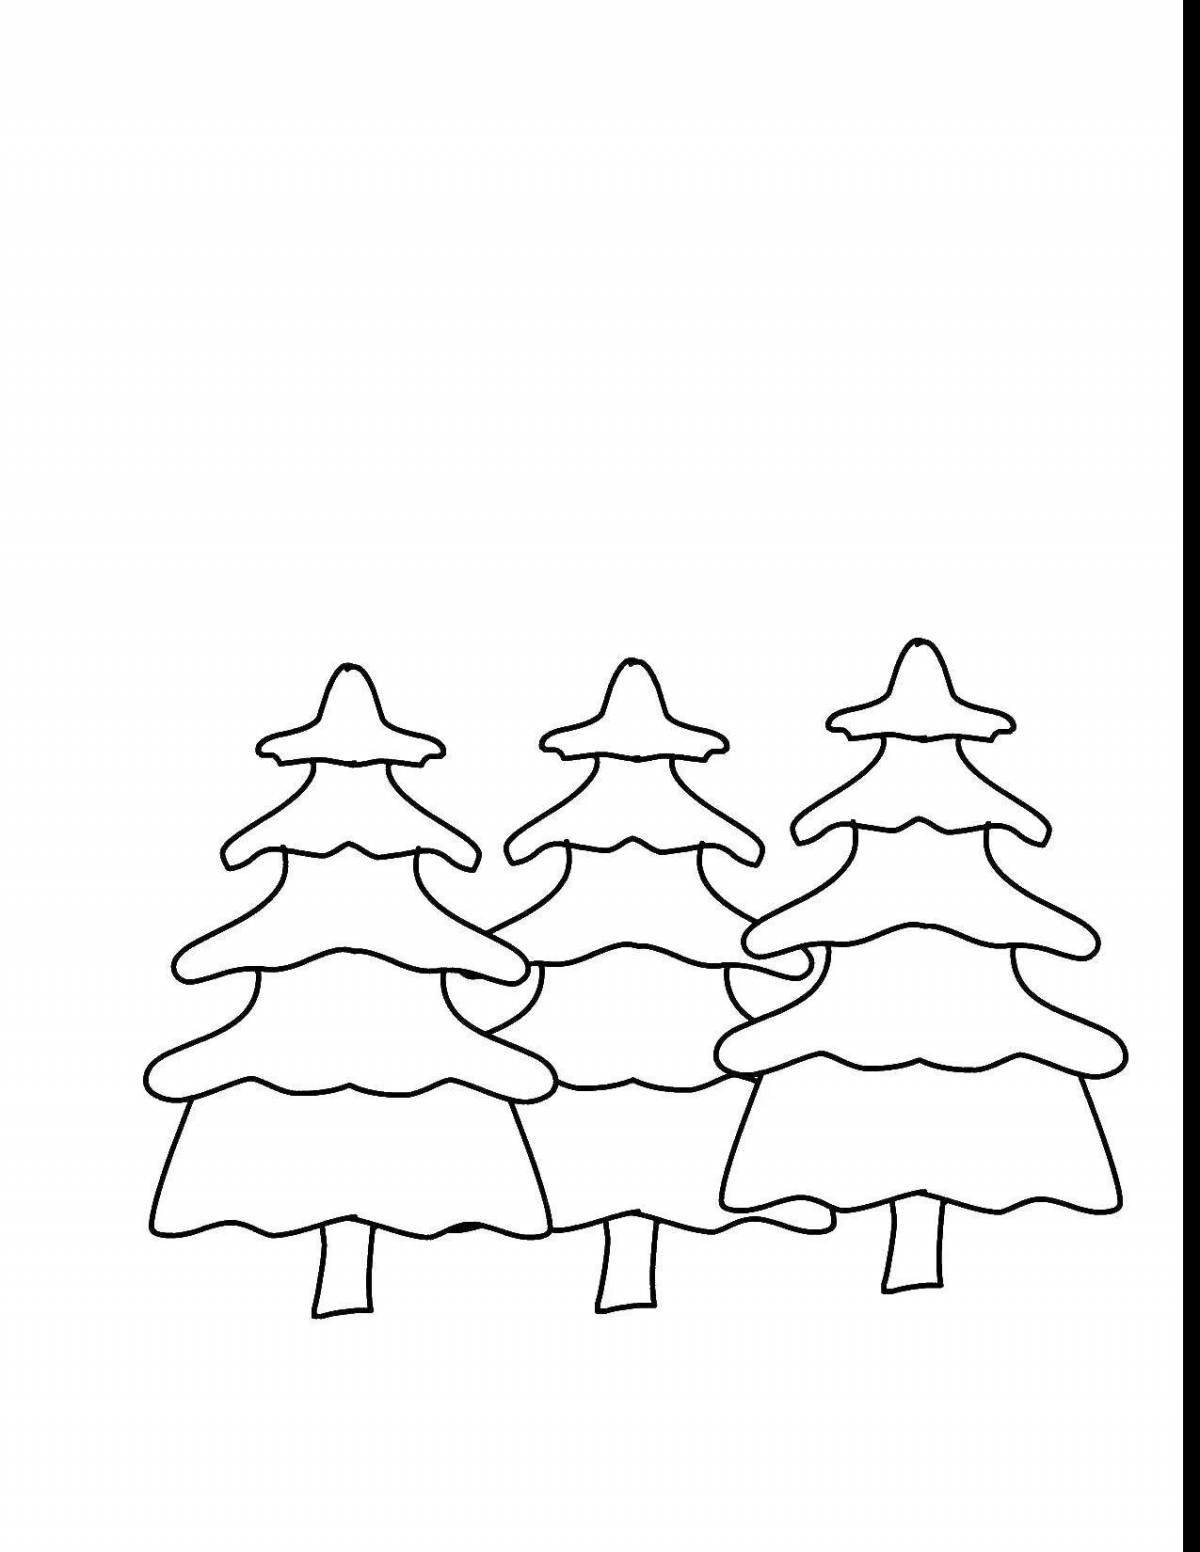 Christmas tree coloring book for kids